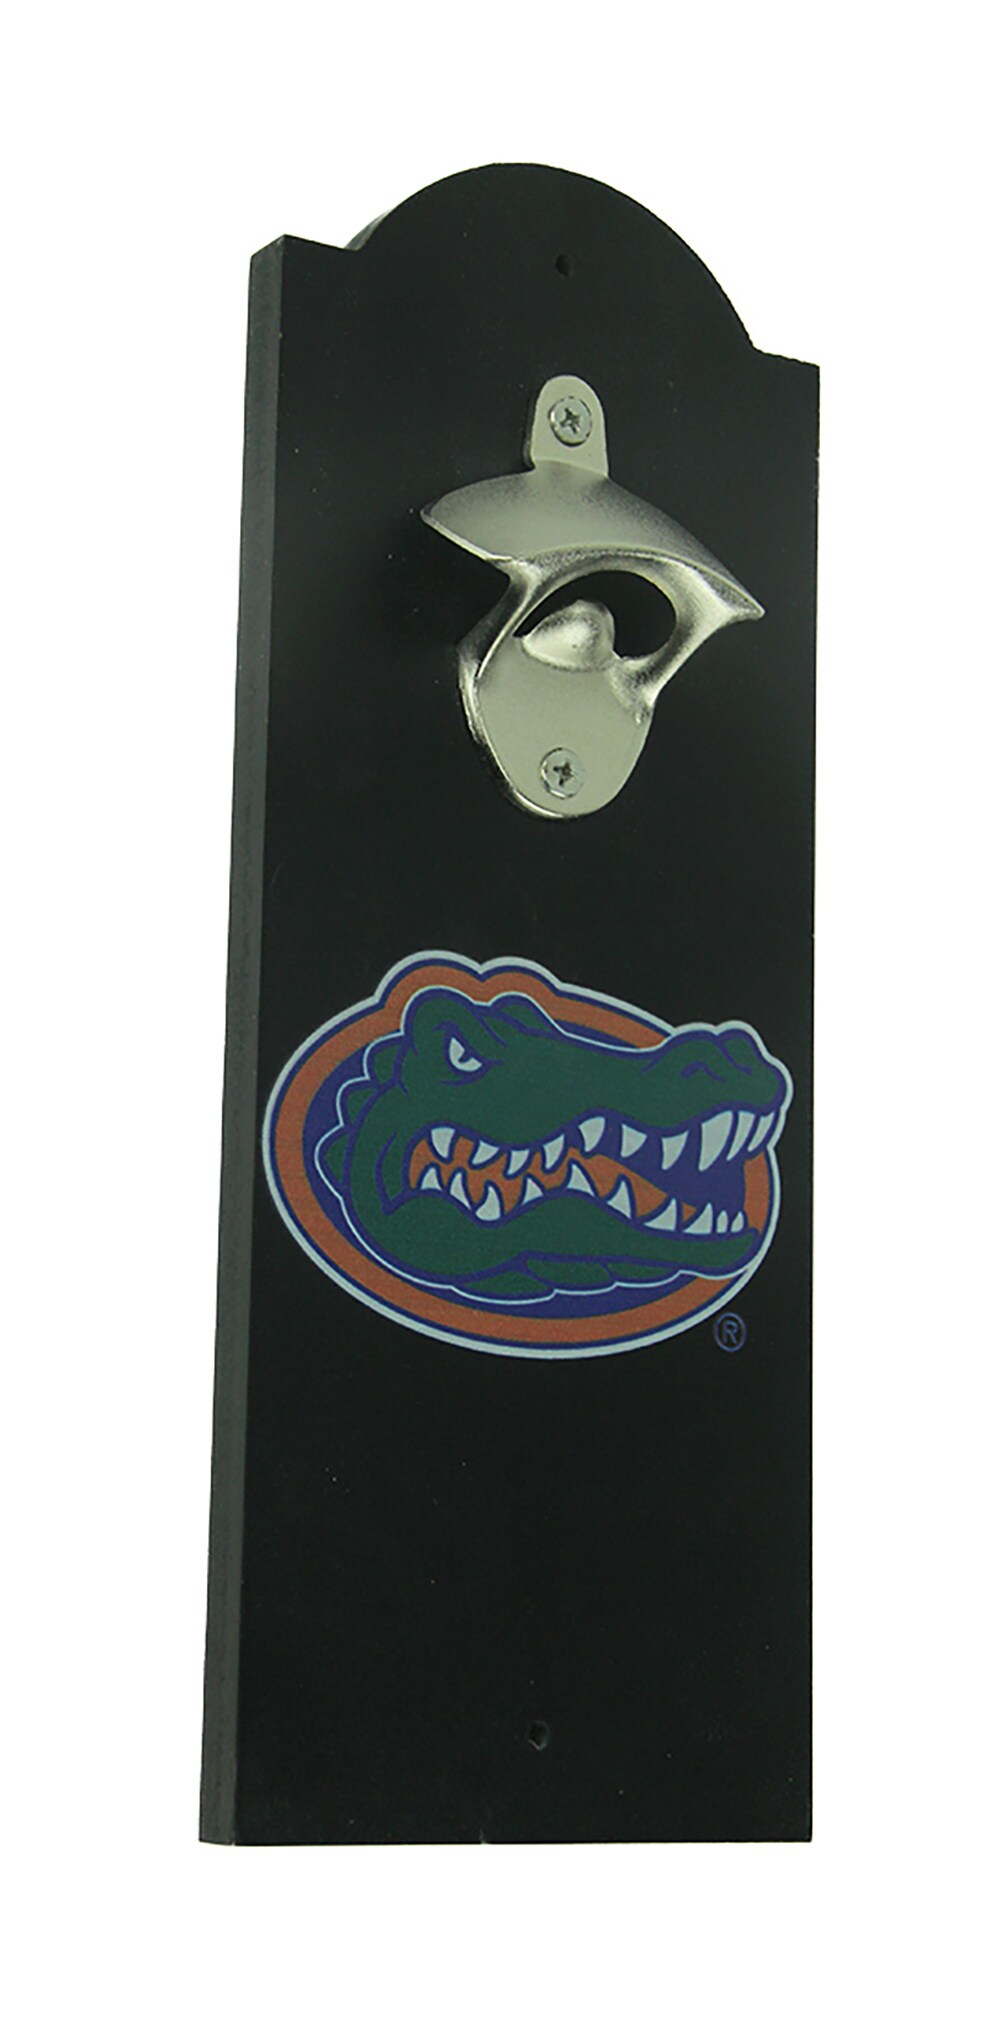 Officially Licensed University of Florida Gators Wall Mounted Bottle Opener